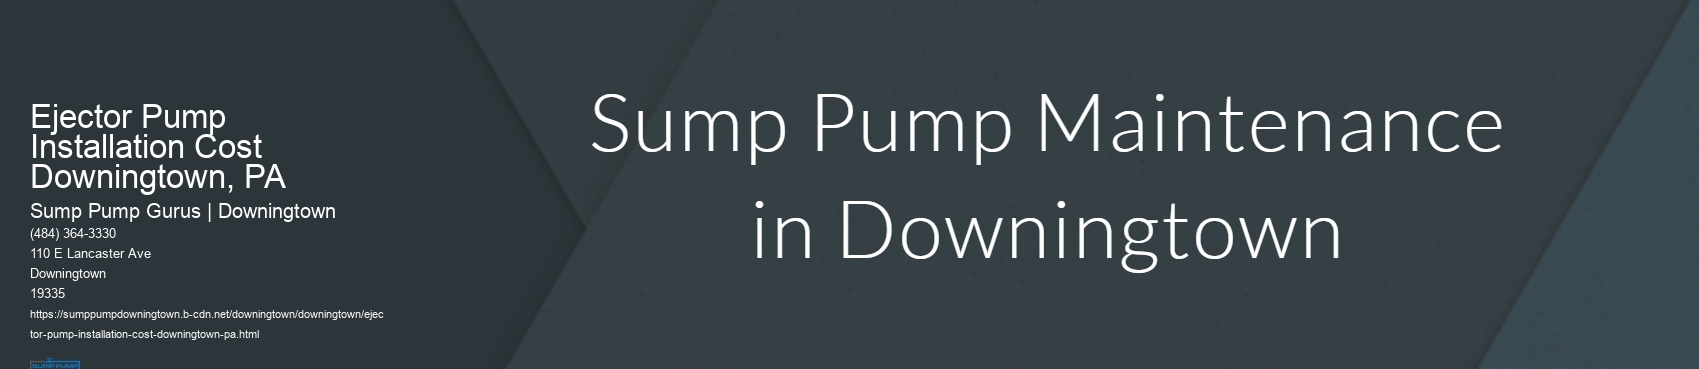 Ejector Pump Installation Cost Downingtown, PA